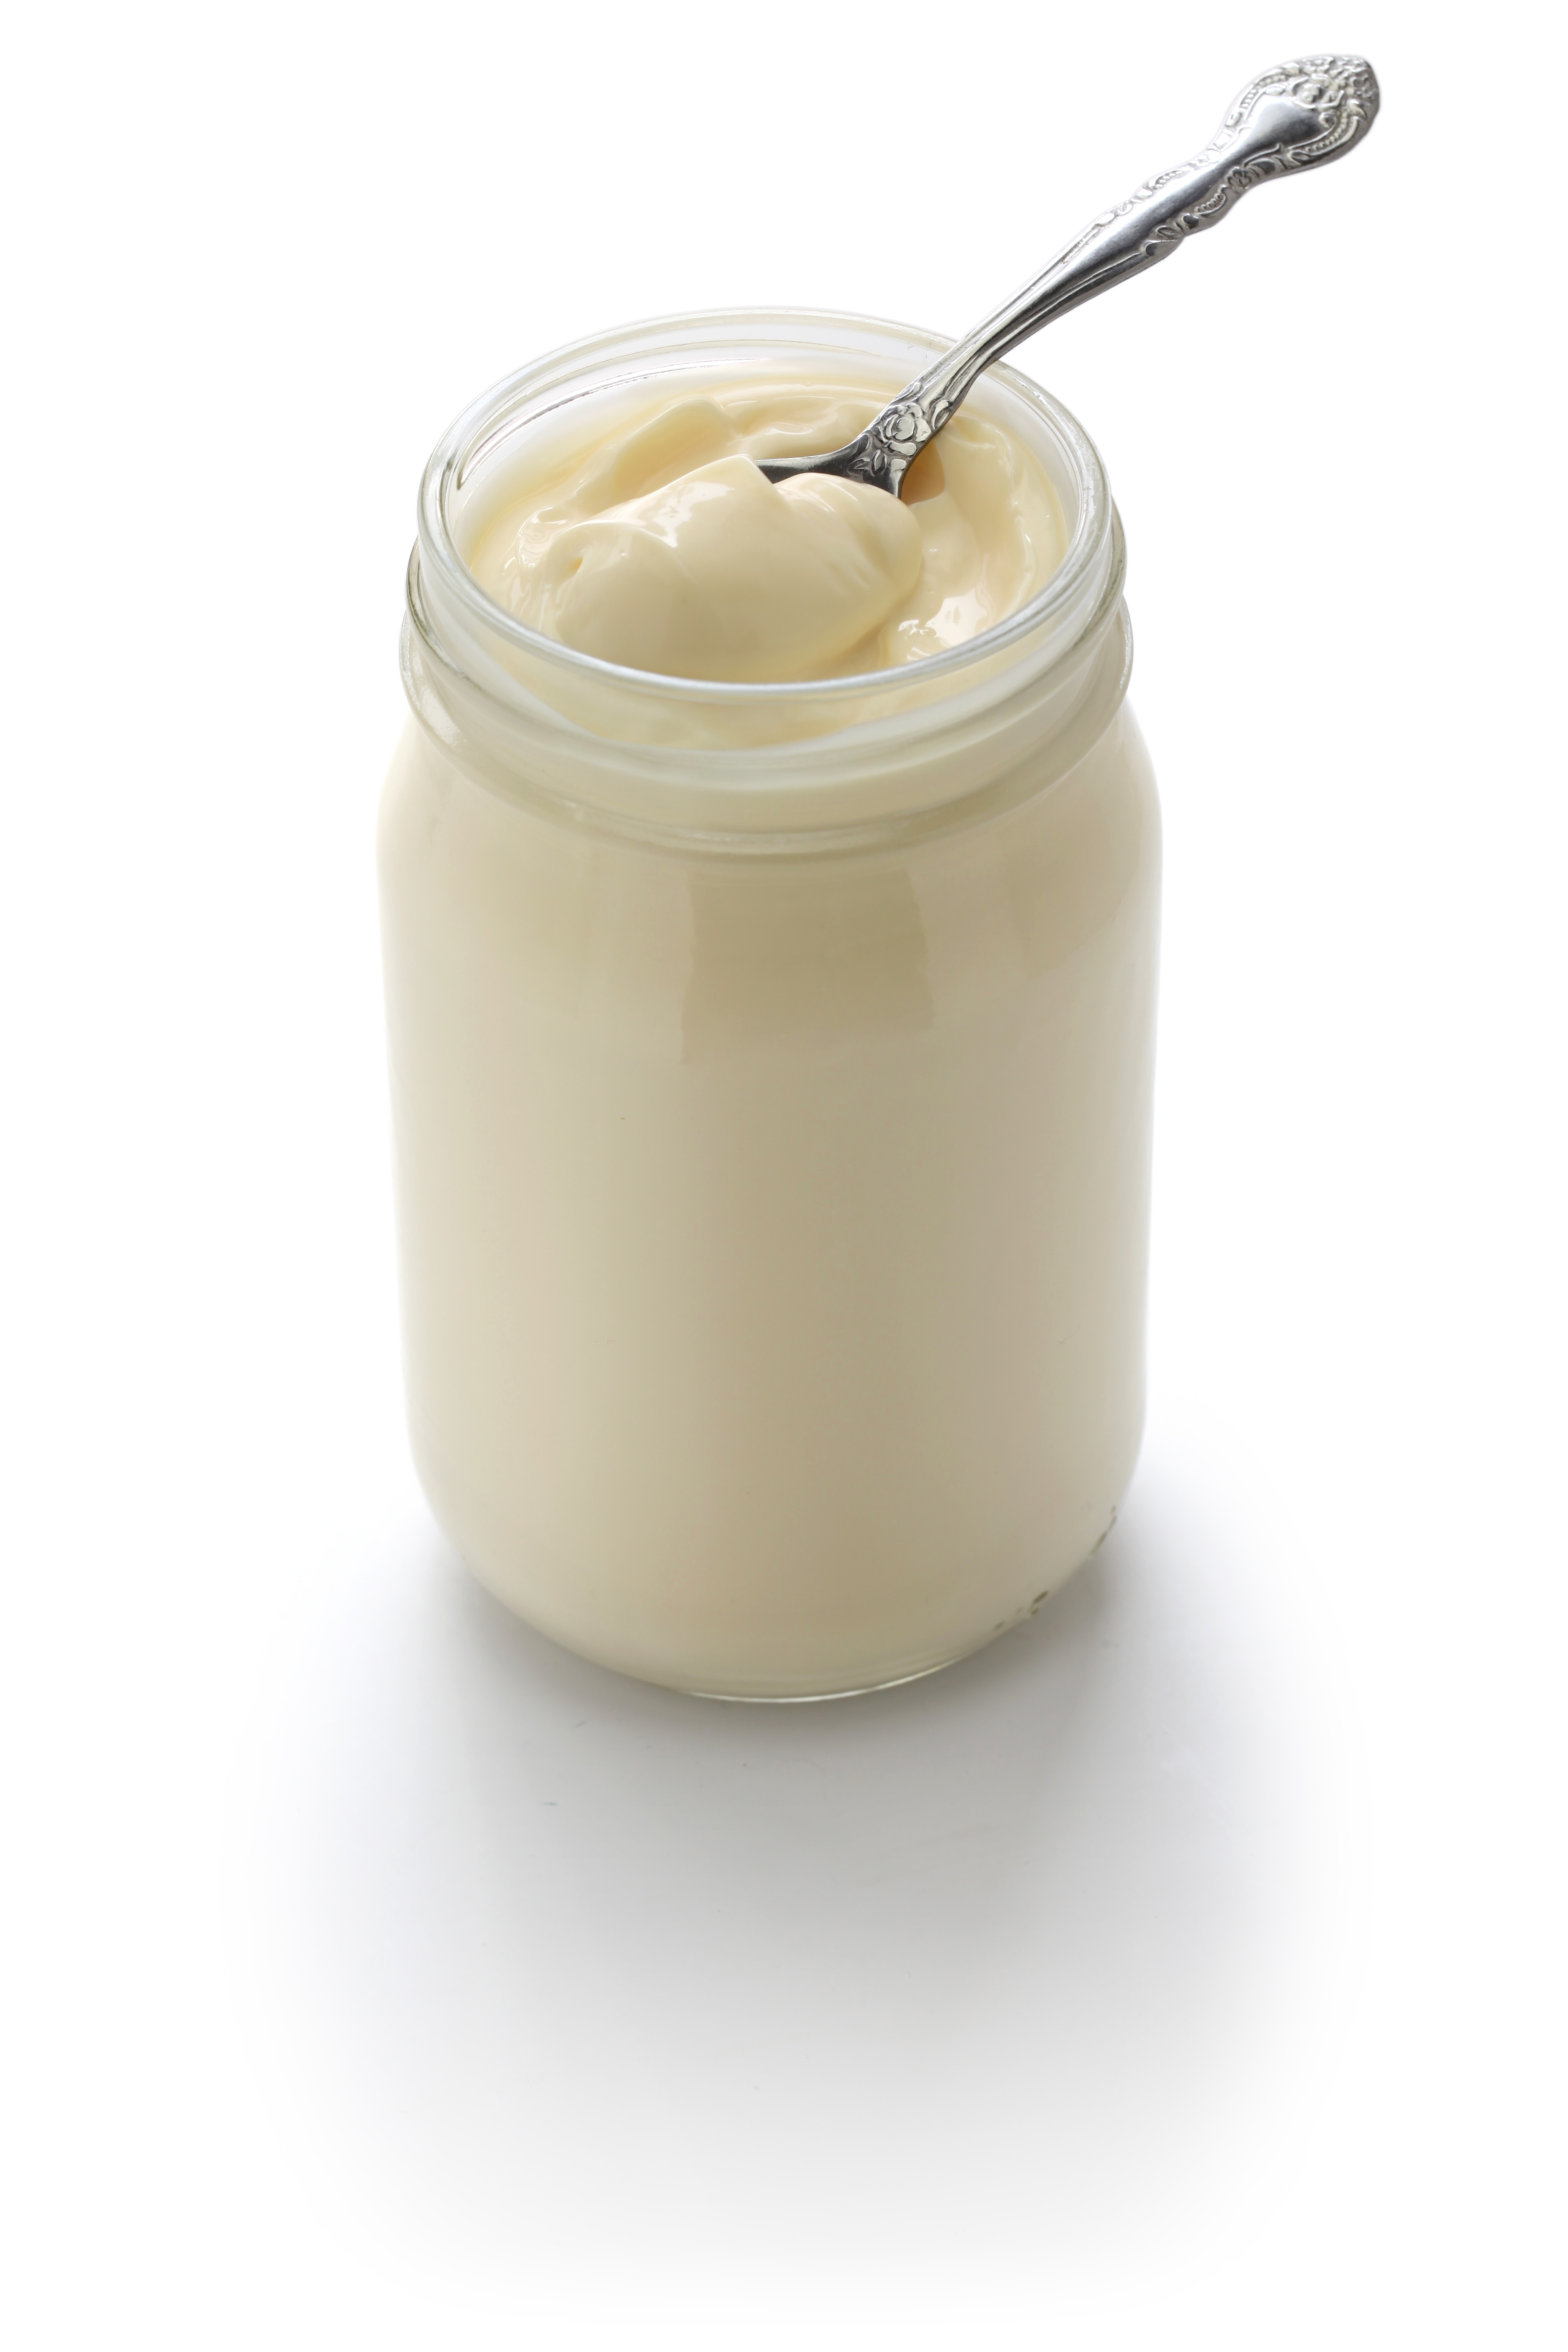 Jar of mayonnaise with a spoon inside on a white background